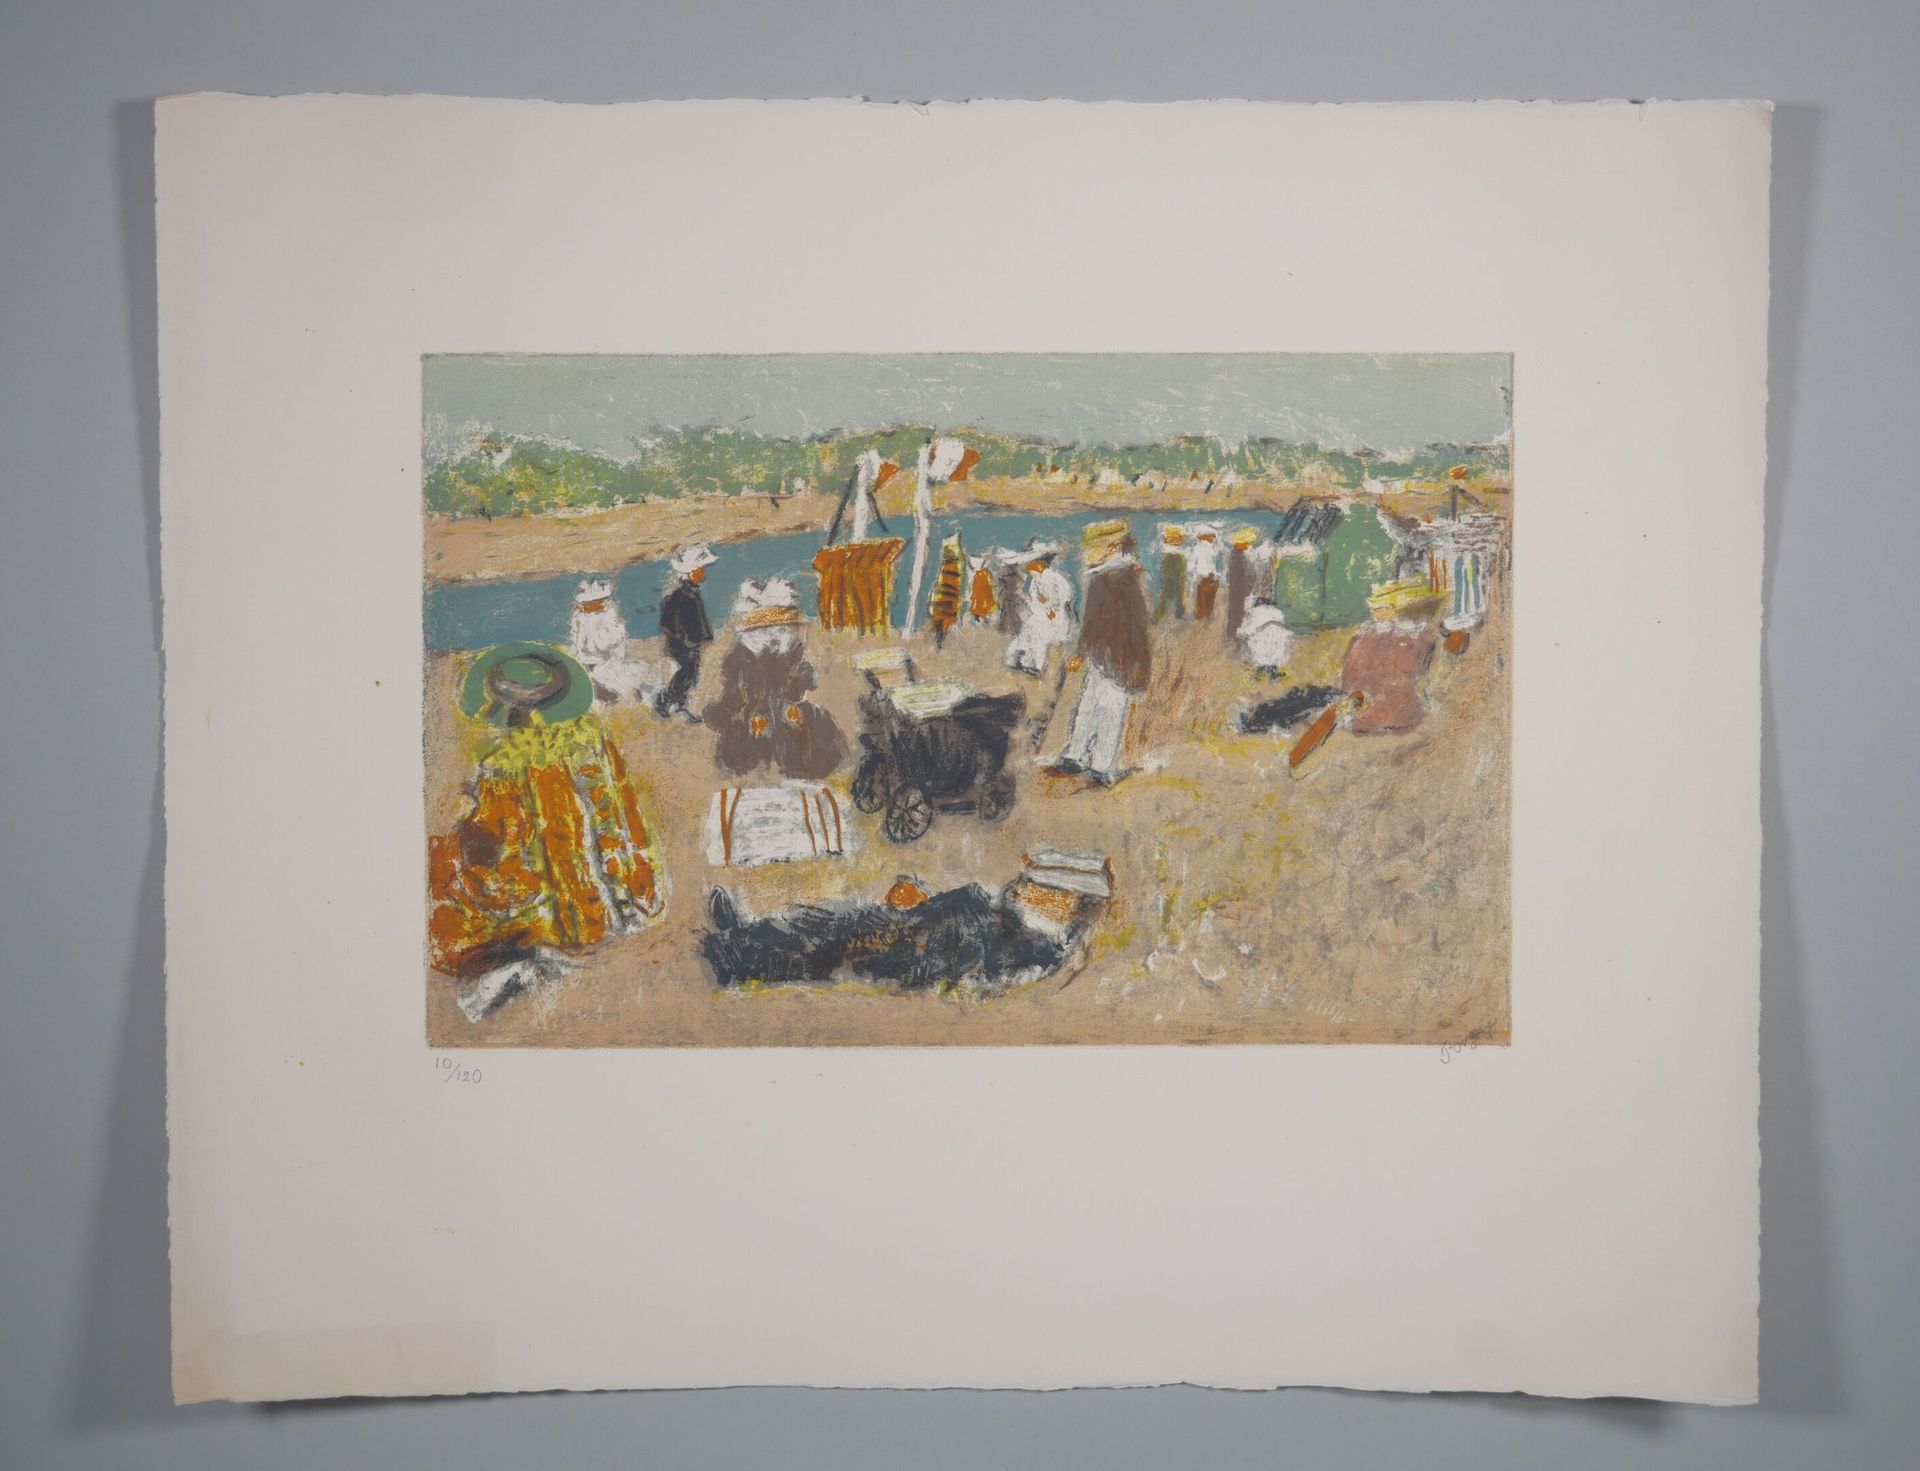 Null Jean POUGNY (1892-1956)
Beachfront 
Color etching signed lower right and ju&hellip;